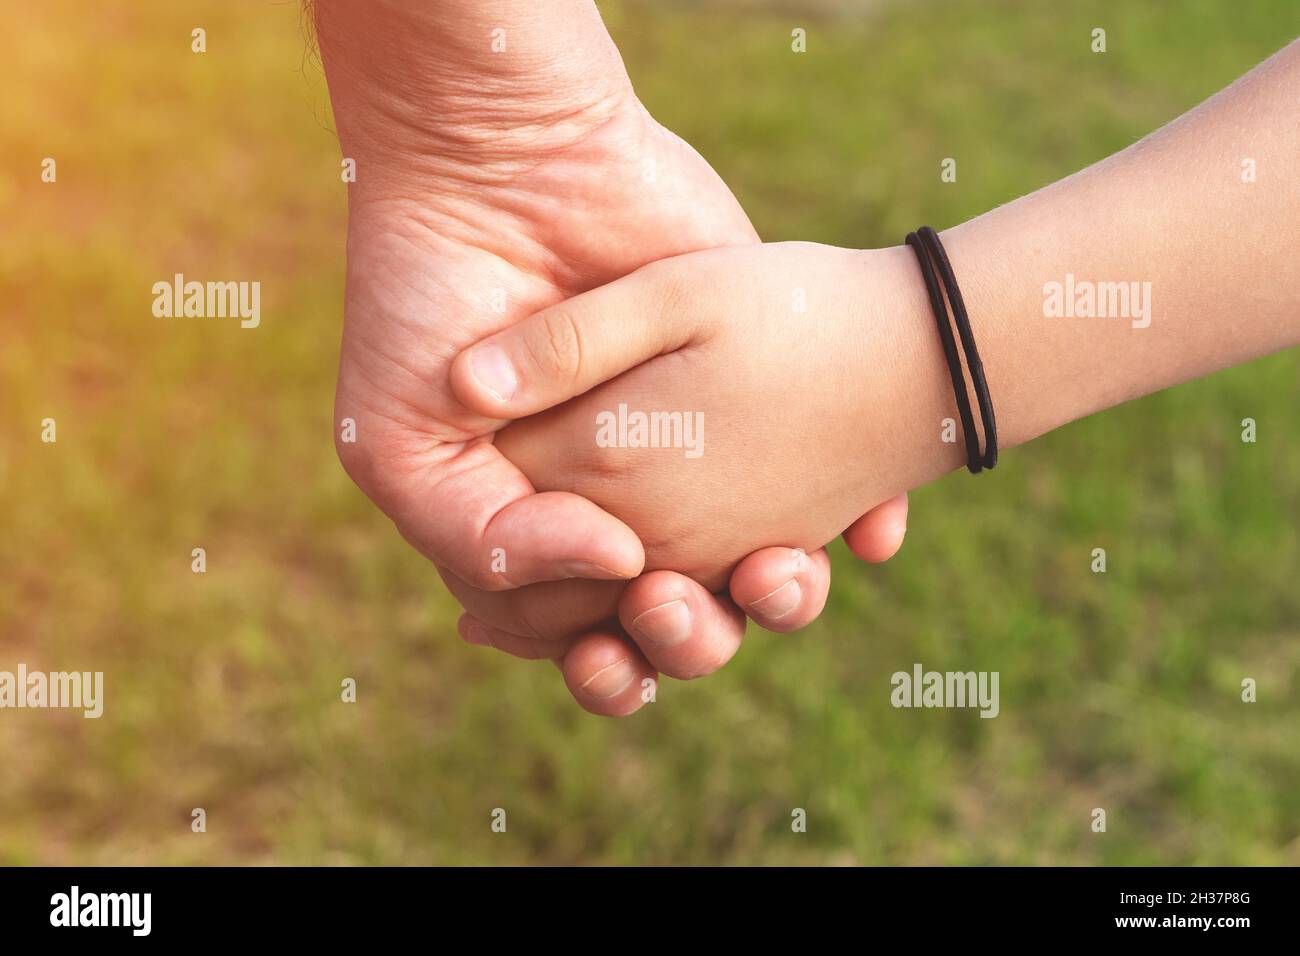 Father holds the hand of a child daughter against blurred nature outdoor background with sunlight. Trust, care and parenting family, father's day concept Stock Photo